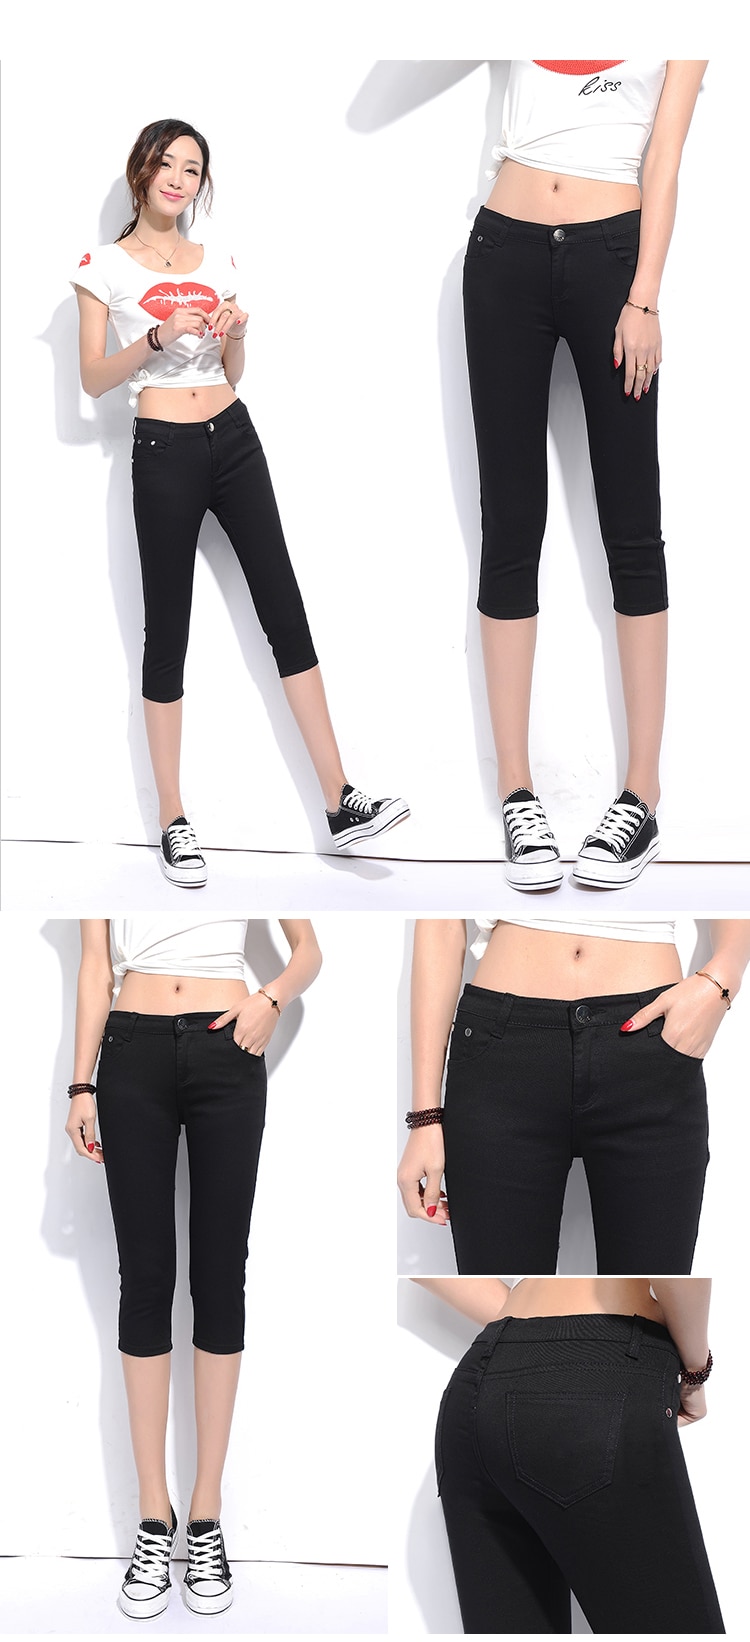 2018 New Spring Leisure Stretch Candy Color Cropped pants Female pencil pants Thin section Trousers Female feet Breeches (10)